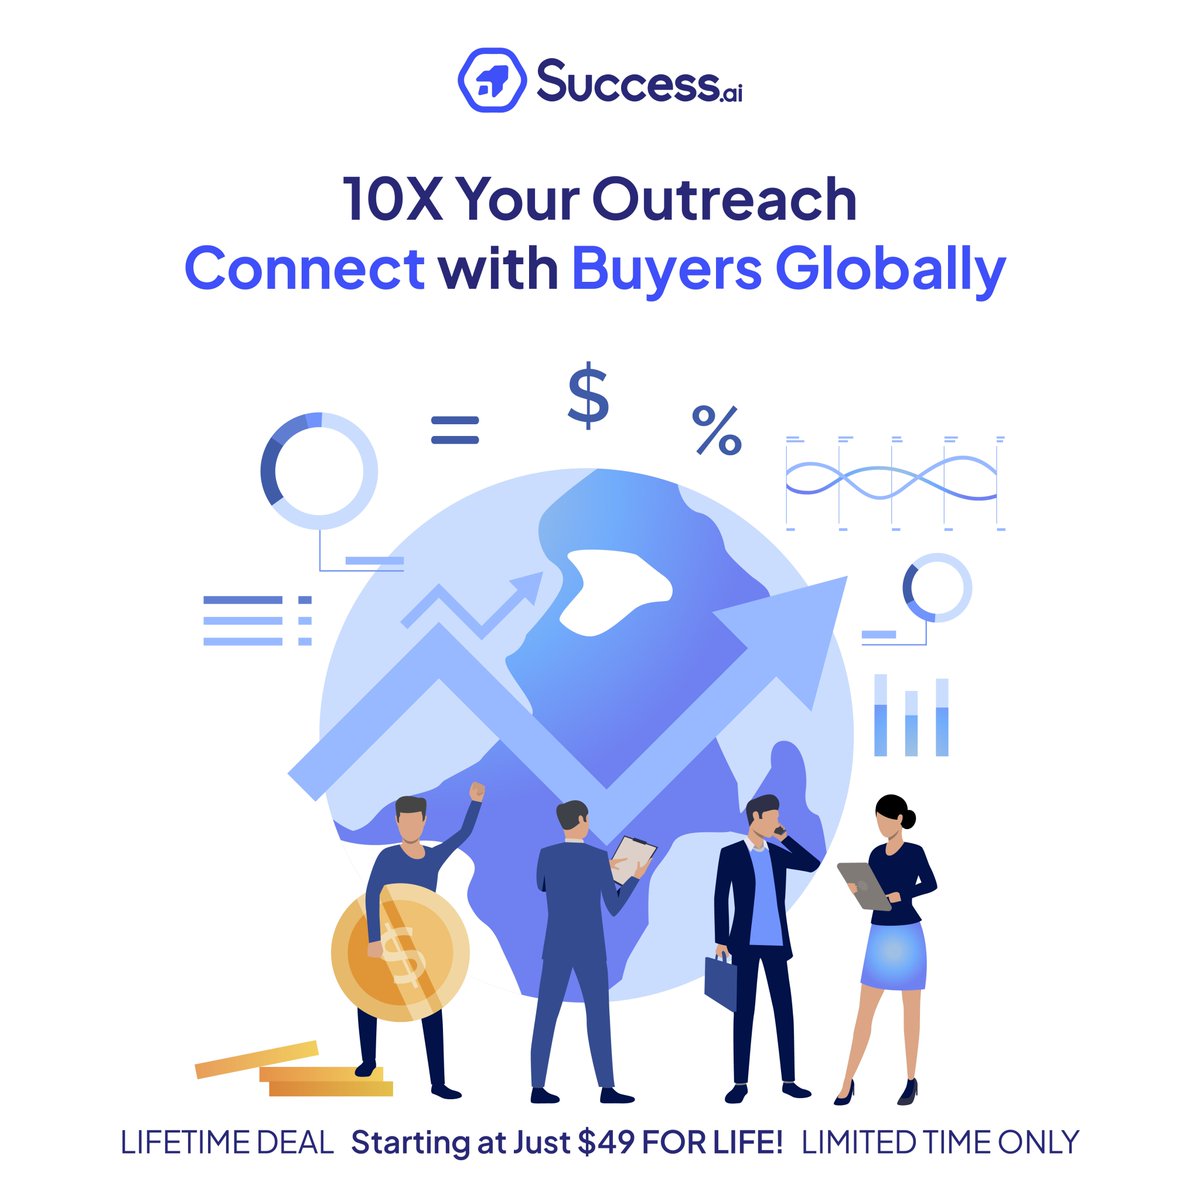 10X your outreach with Success.ai! 
Unlock global connections, never miss an opportunity, and stay budget-friendly. Transform your approach now with our LIFETIME DEAL at $49! 
Act fast: appsumo.com/products/succe… 

#SuccessAI #BoundlessOutreach #GlobalConnections